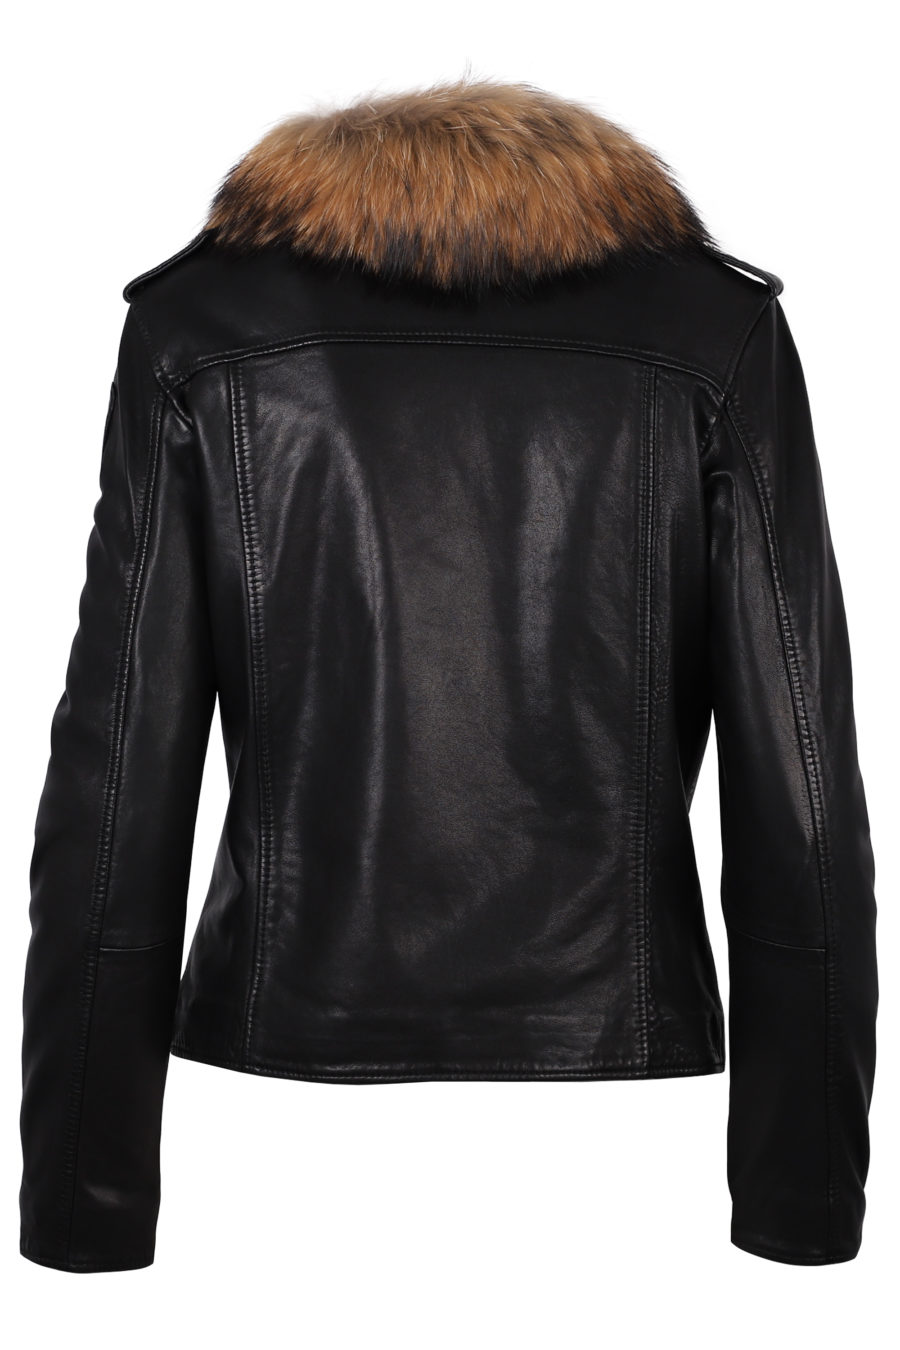 Leather jacket with fur collar - IMG 1165